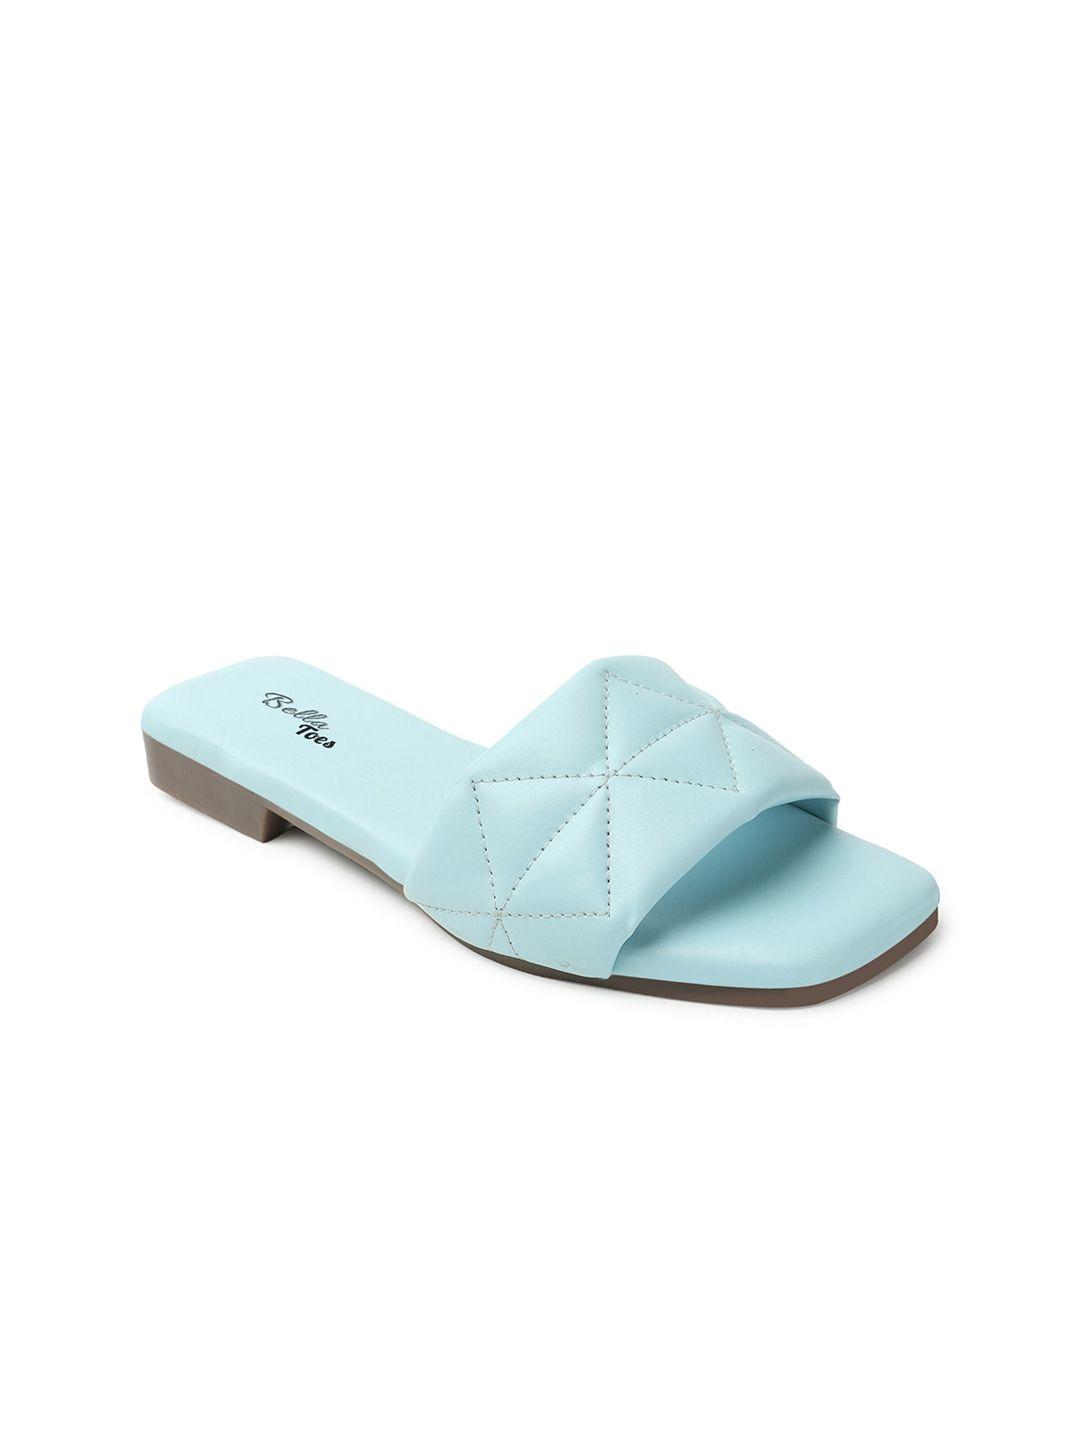 bella toes quilted open toe flats